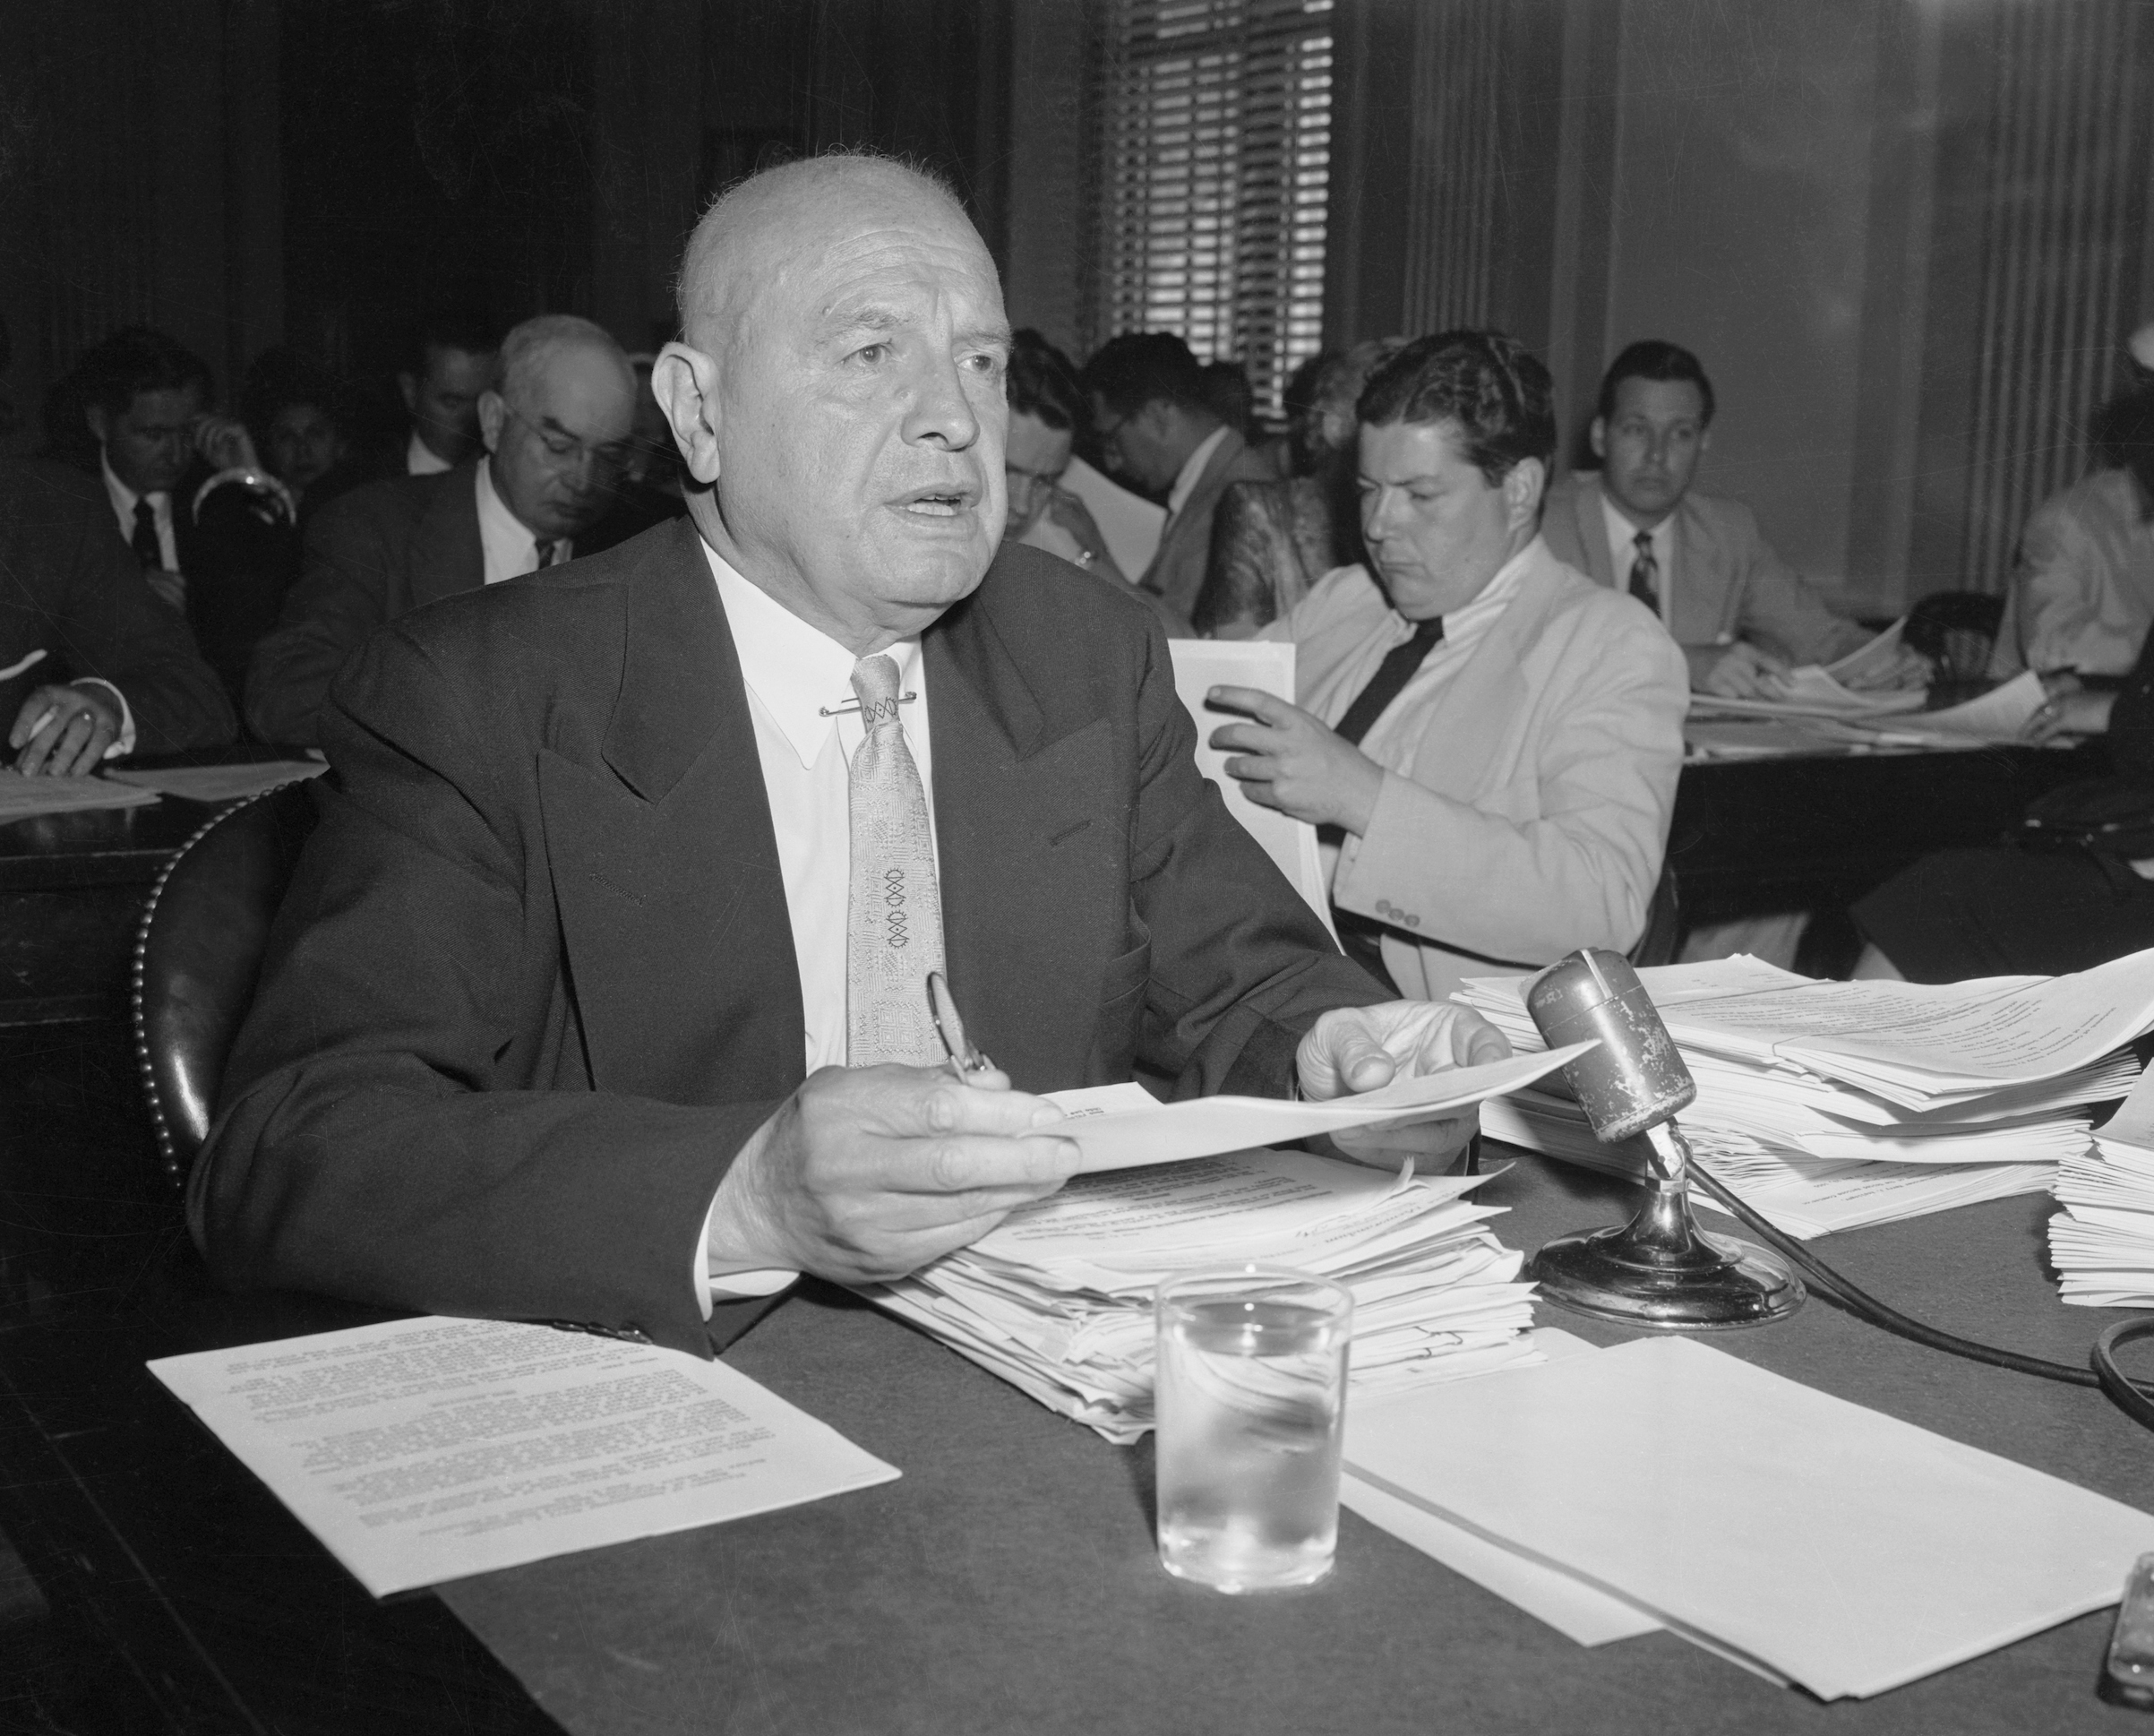 Narcotics Commissioner Harry J. Anslinger as he testifies before the Senate Judiciary Subcommittee in 1955. (Bettmann/Getty Images)